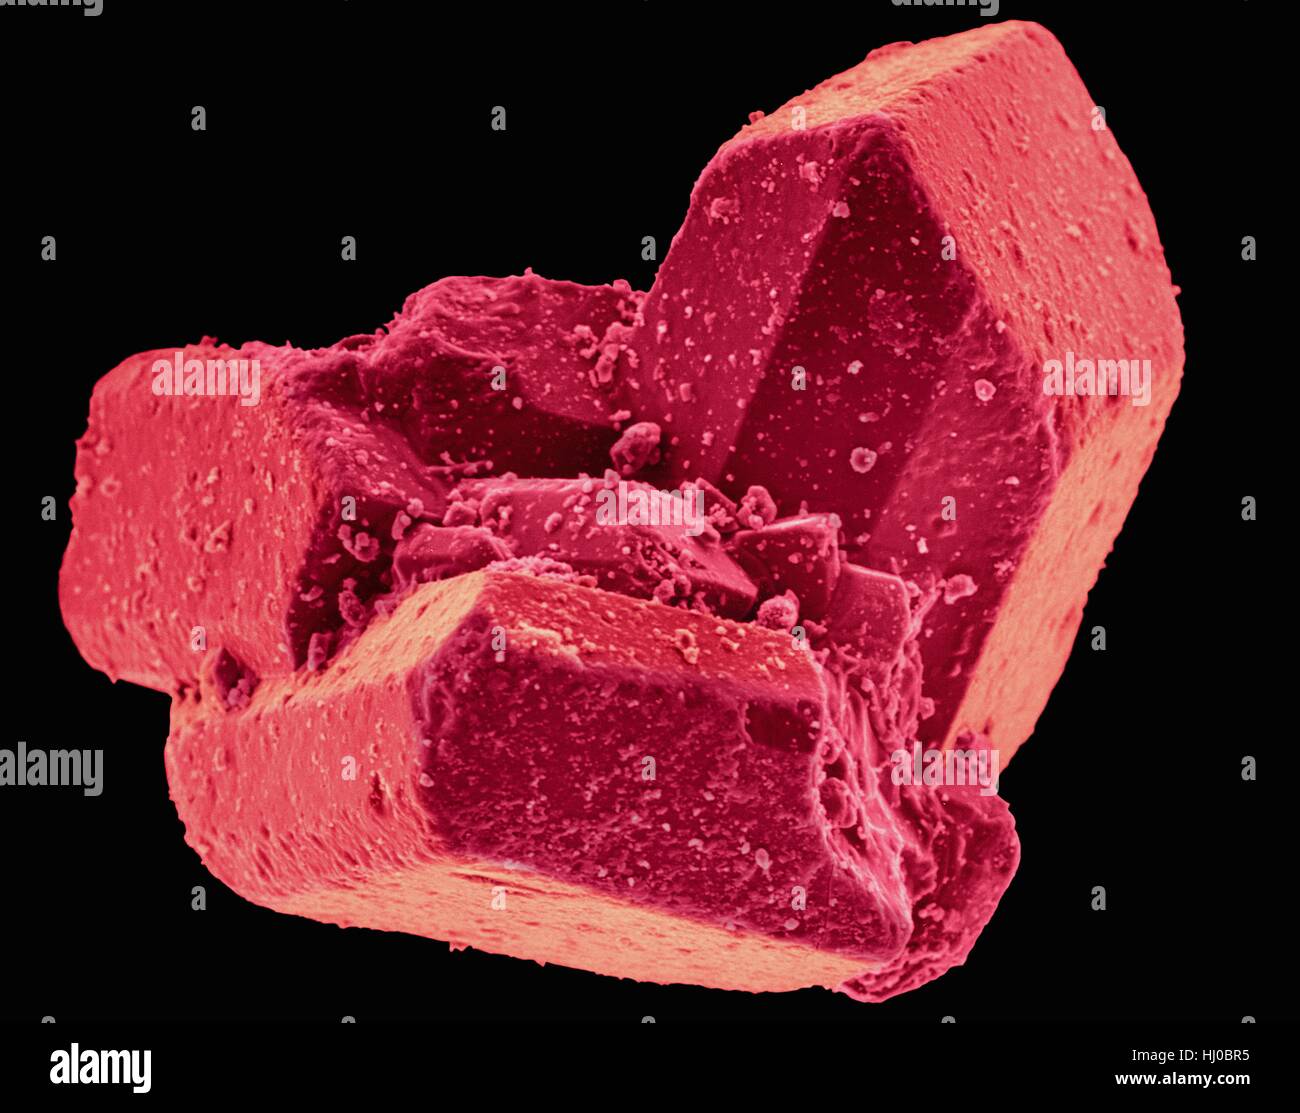 Coloured scanning electron micrograph (SEM) of Table sugar (sucrose) crystals. Sucrose, or common table sugar (also called saccharose), is a disaccharide that consists of two component monosaccharidesglucose and fructose. It is best known for its role in human nutrition and is formed by plants but not by higher organisms. It is commonly used as a sweetener. Magnification: x61 when shortest axis printed at 25 millimetres. Stock Photo